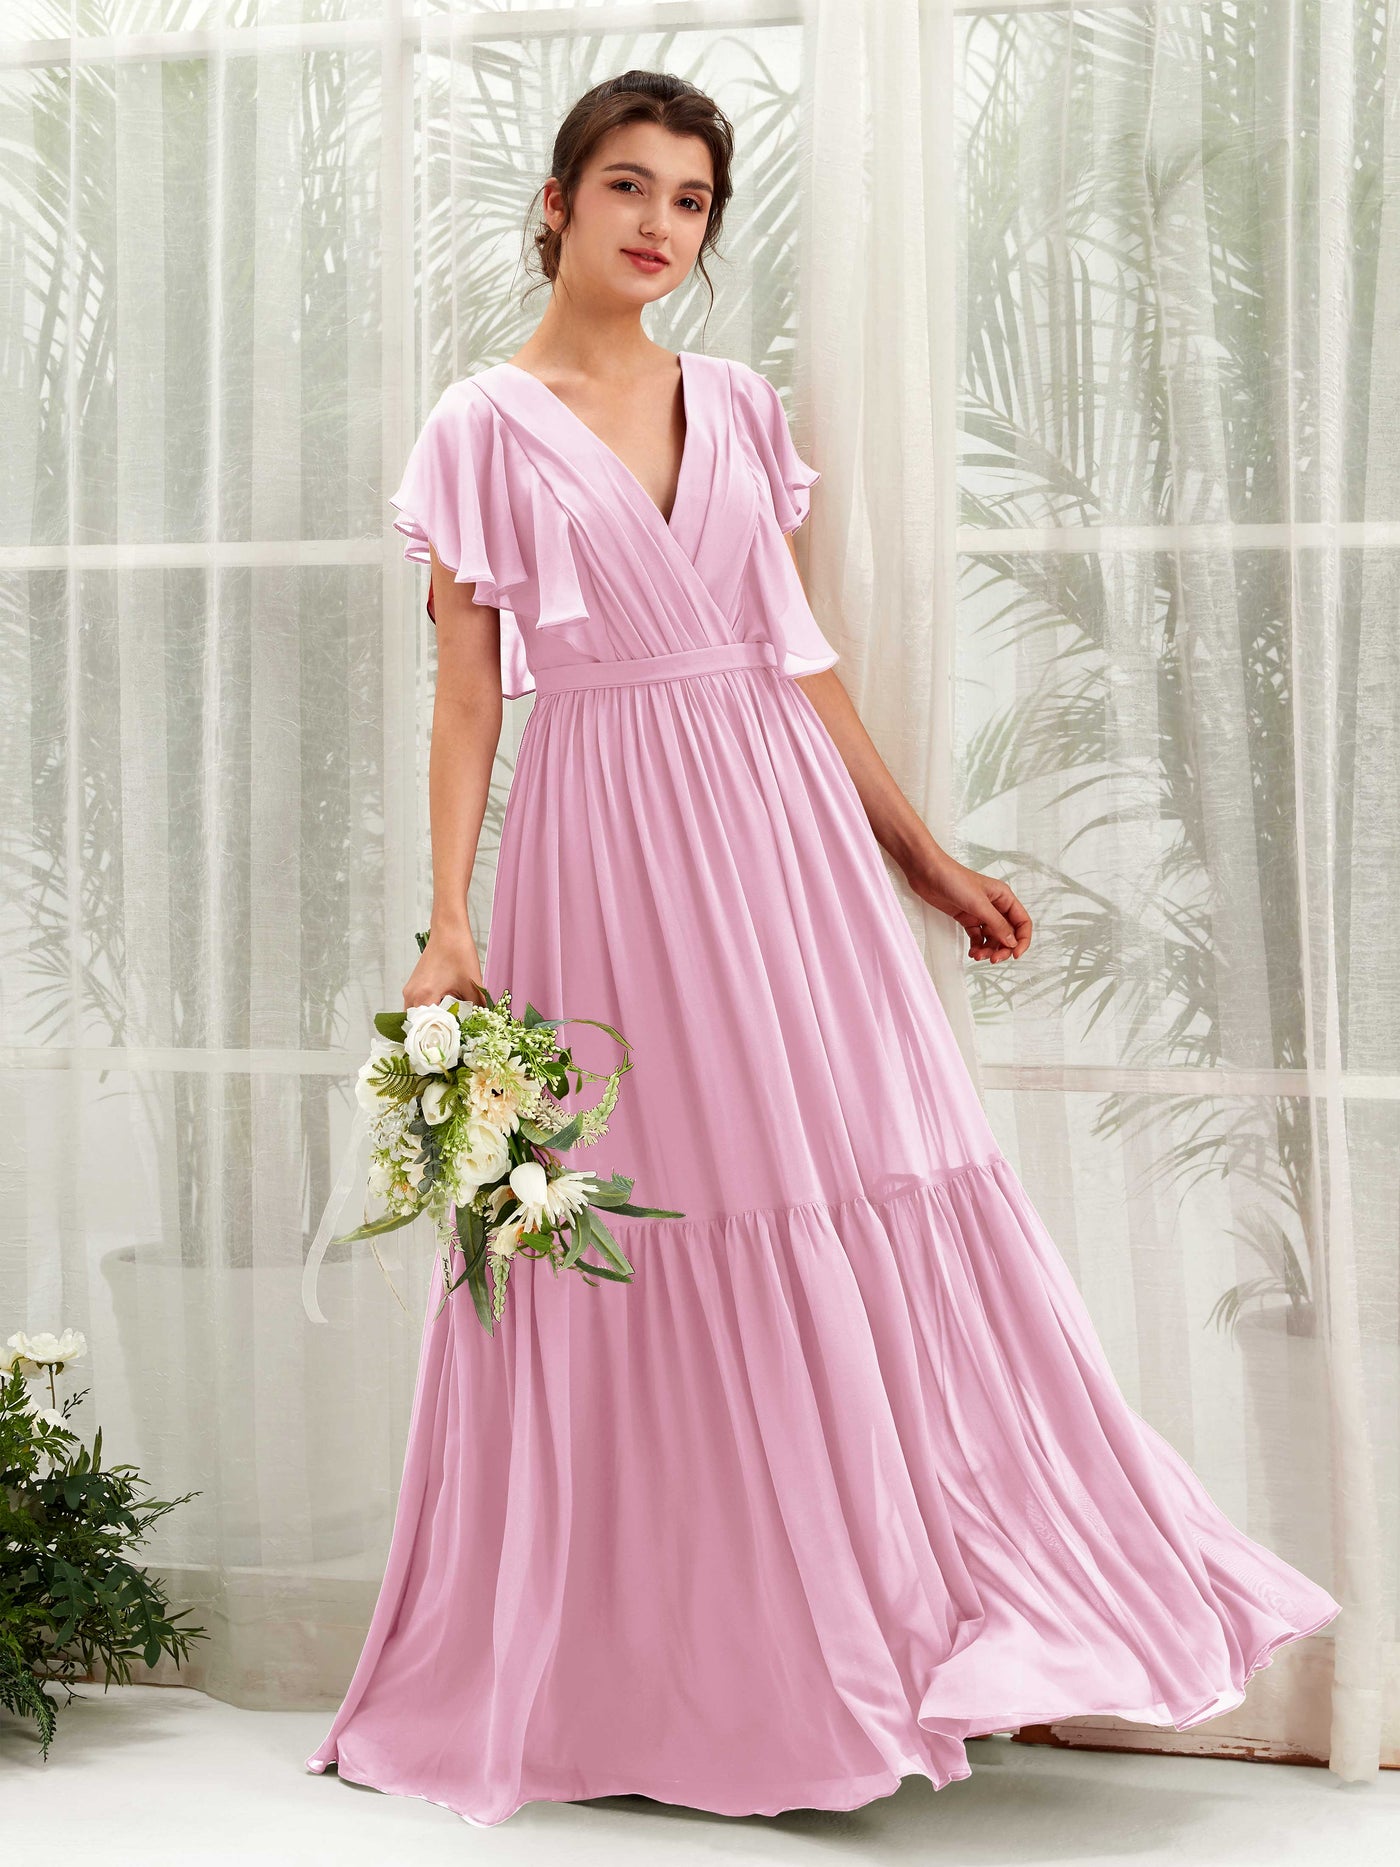 Candy Pink Bridesmaid Dresses Bridesmaid Dress A-line Chiffon V-neck Full Length Short Sleeves Wedding Party Dress (81225939)#color_candy-pink